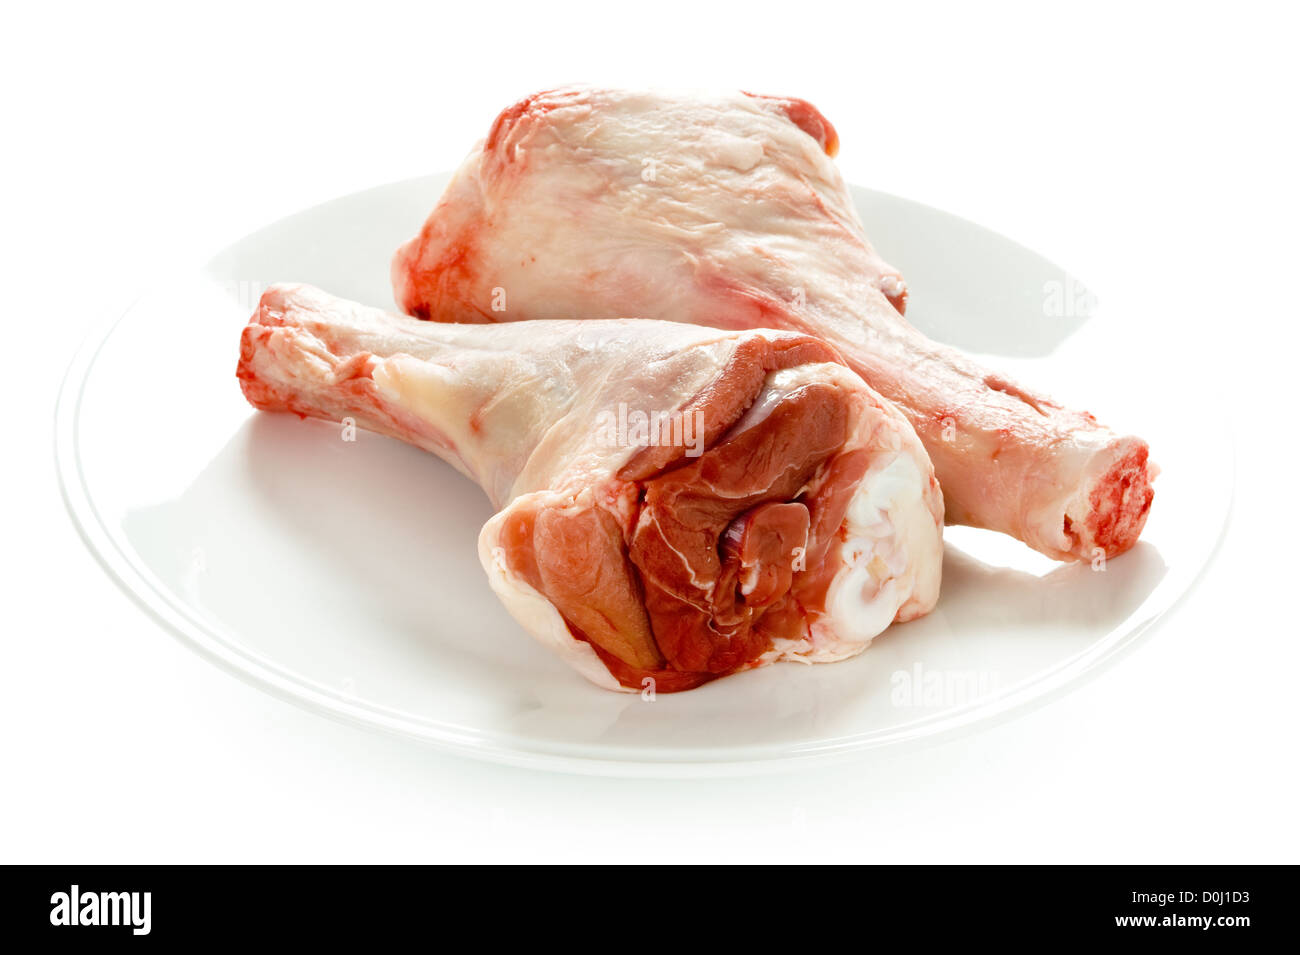 two raw lamb shanks on a plate isolated on white background Stock Photo